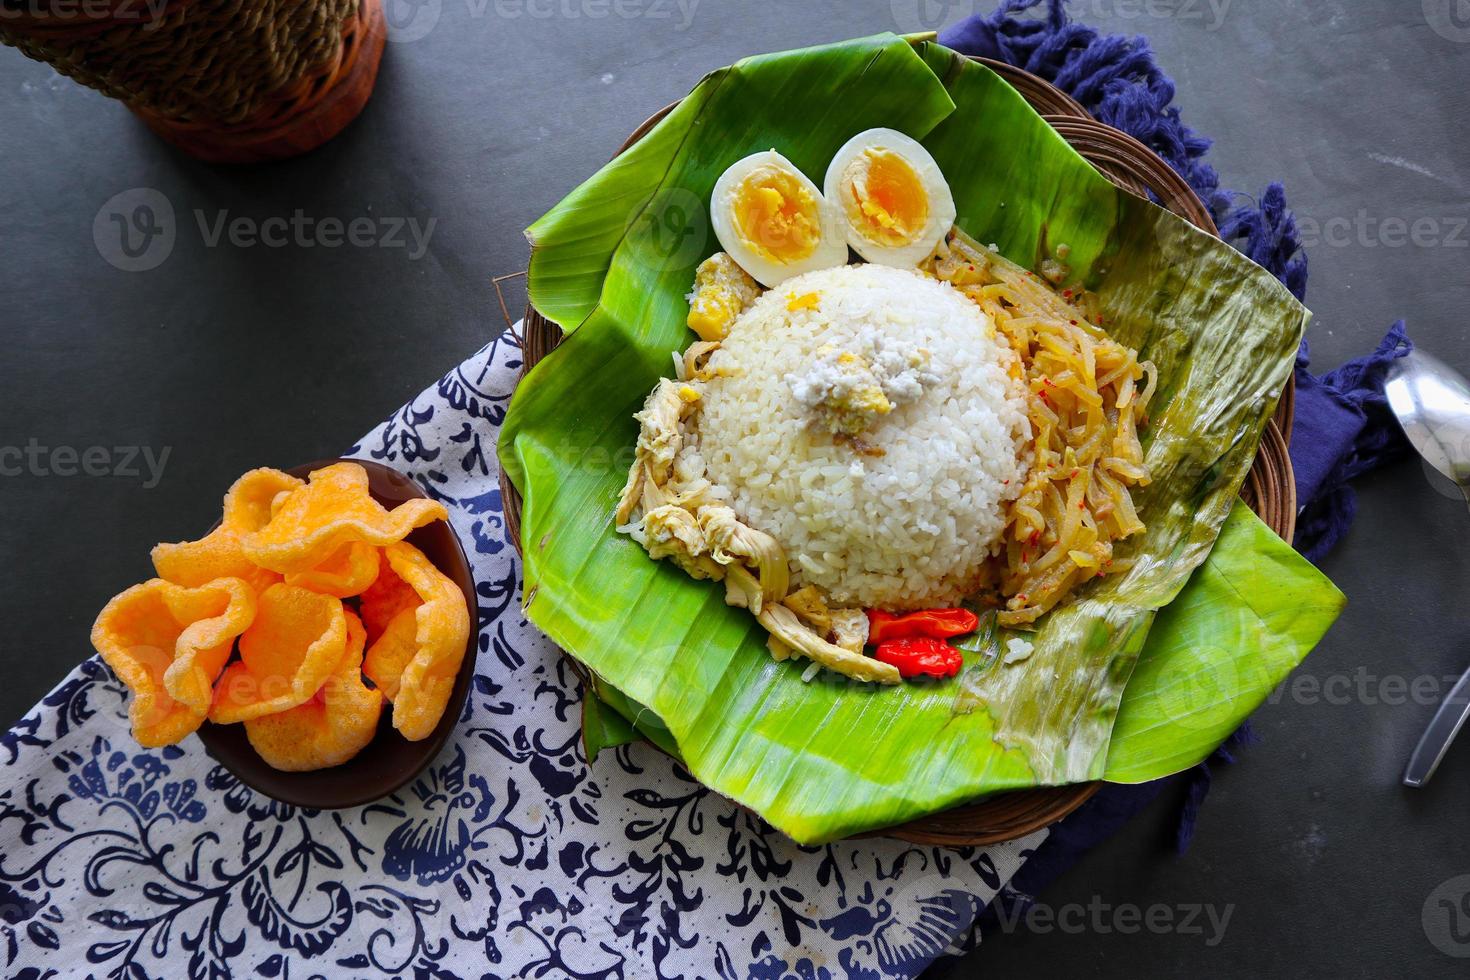 Nasi Liwet Solo or Sego Liwet Solo is a traditional food from Surakarta. made from savory rice, chayote and boiled egg, chicken, thick coconut milk served on a banana leaf photo